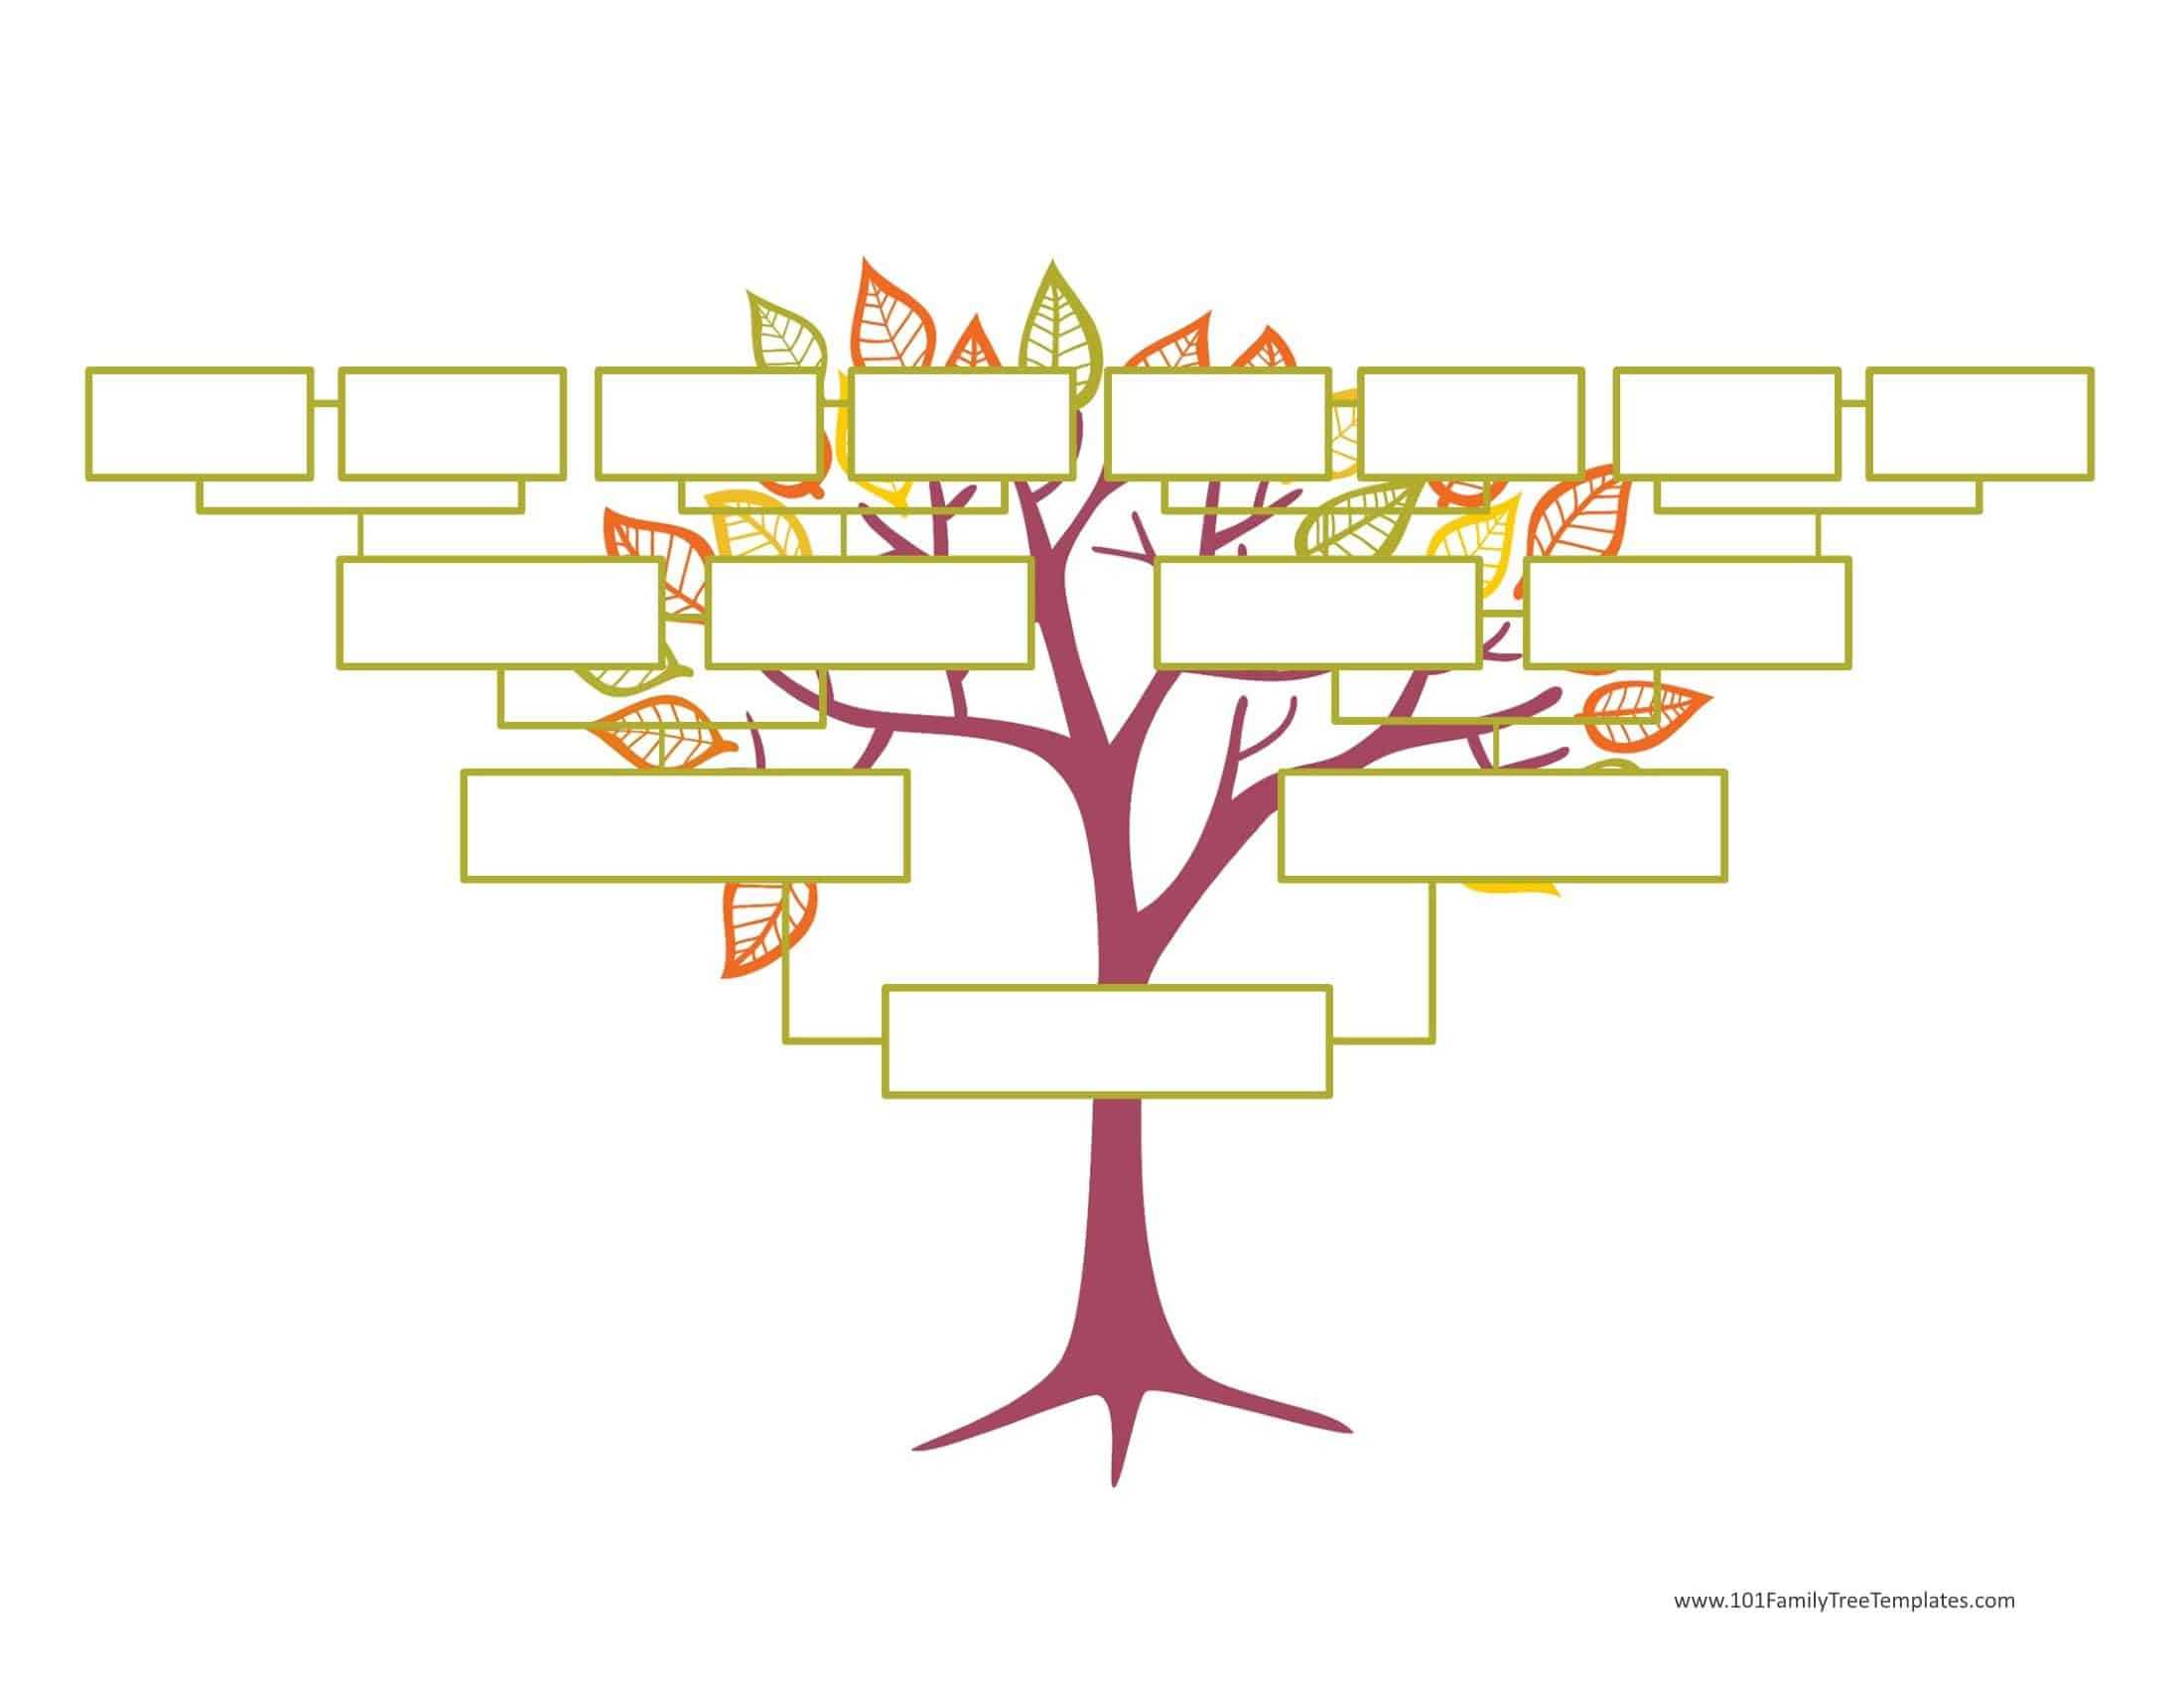 Blank Family Tree Template | Free Instant Download Regarding Blank Family Tree Template 3 Generations